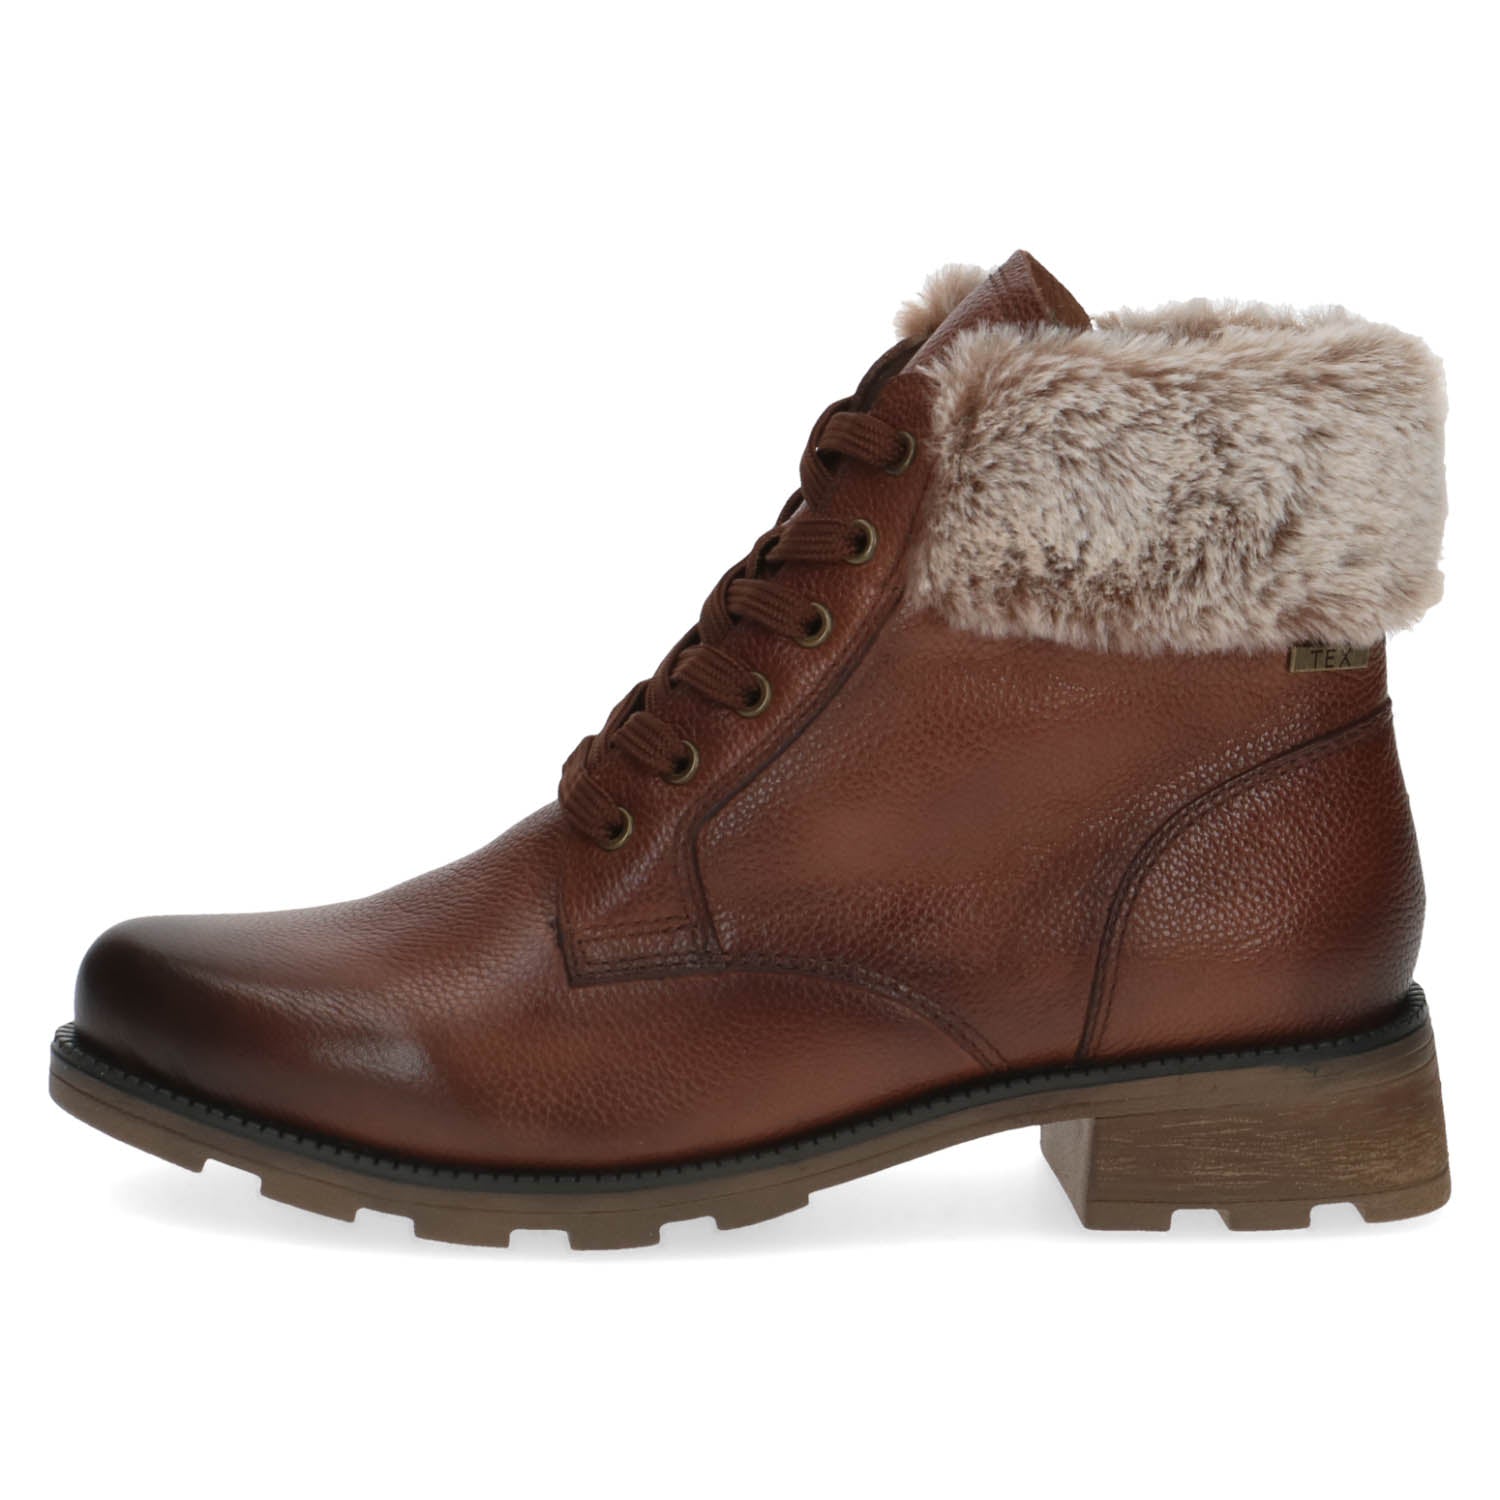 Front view of the Caprice Casual Lace-Up Ankle Boot.